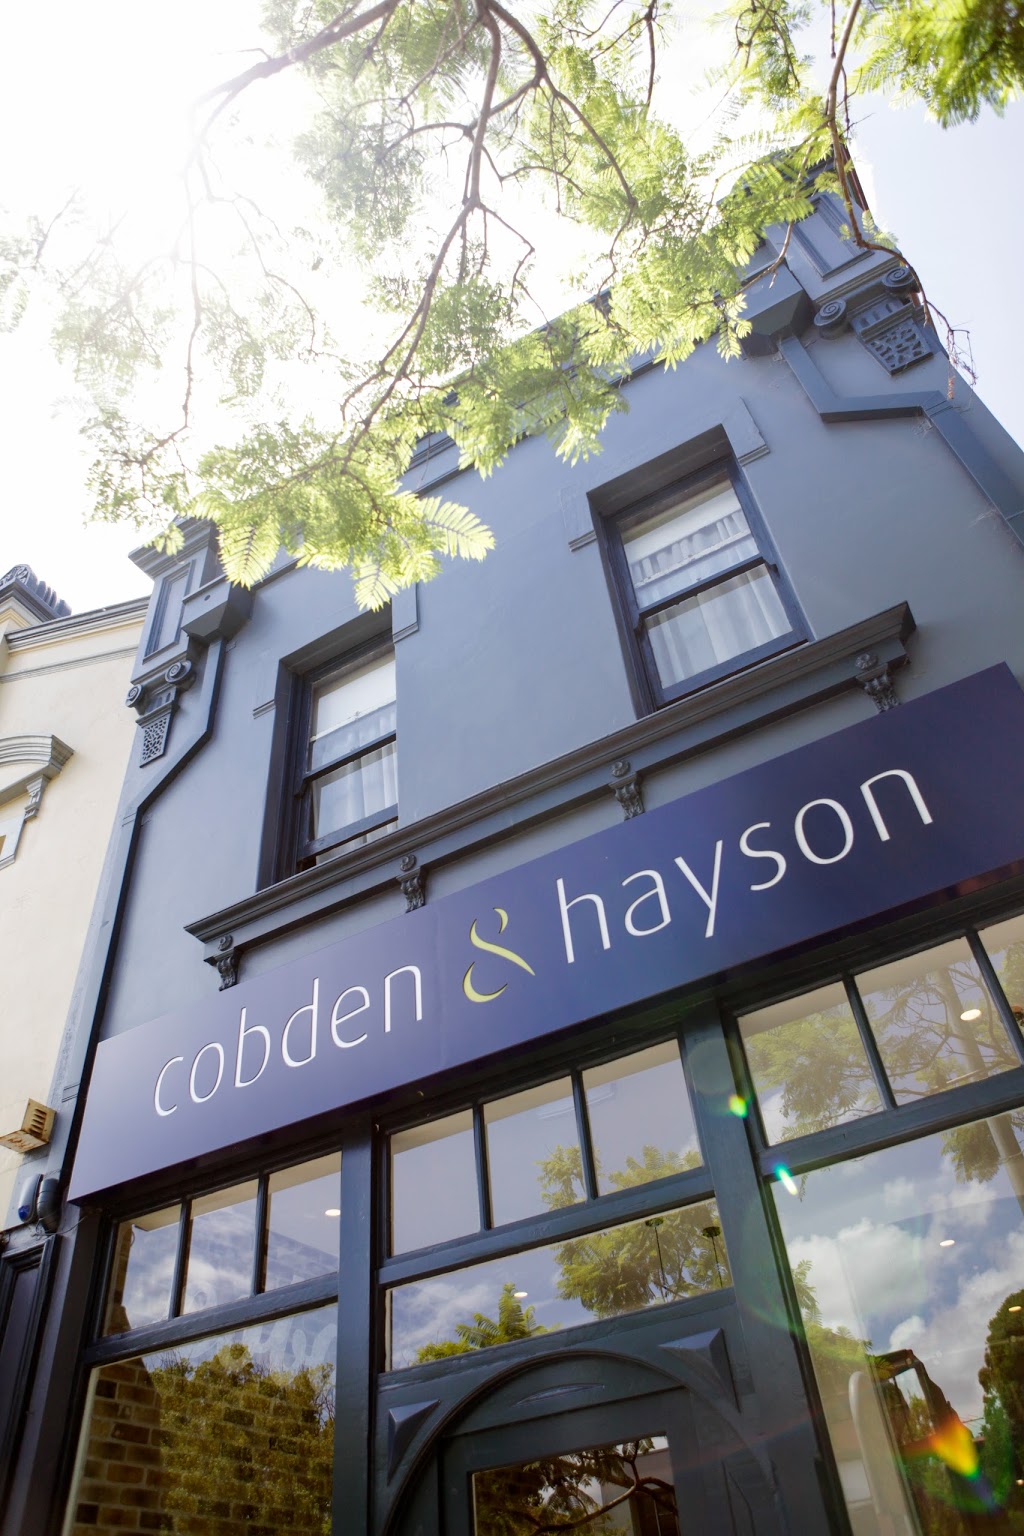 Cobden & Hayson Annandale | real estate agency | 99 Johnston St, Annandale NSW 2038, Australia | 0295524888 OR +61 2 9552 4888